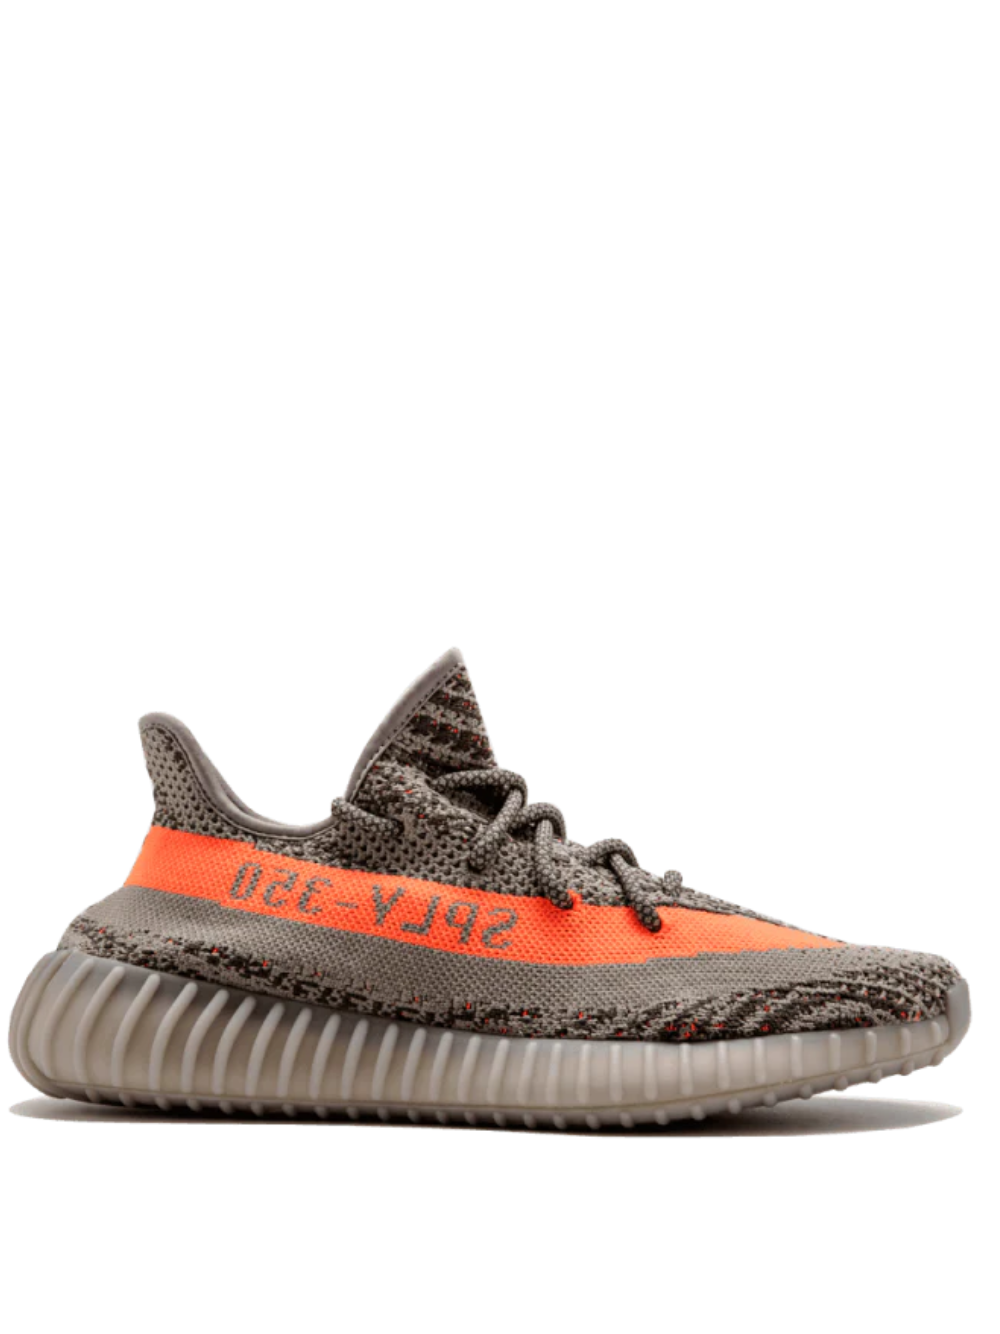 Adidas Yeezy Boost 350 V2 Beluga shoes and sneakers